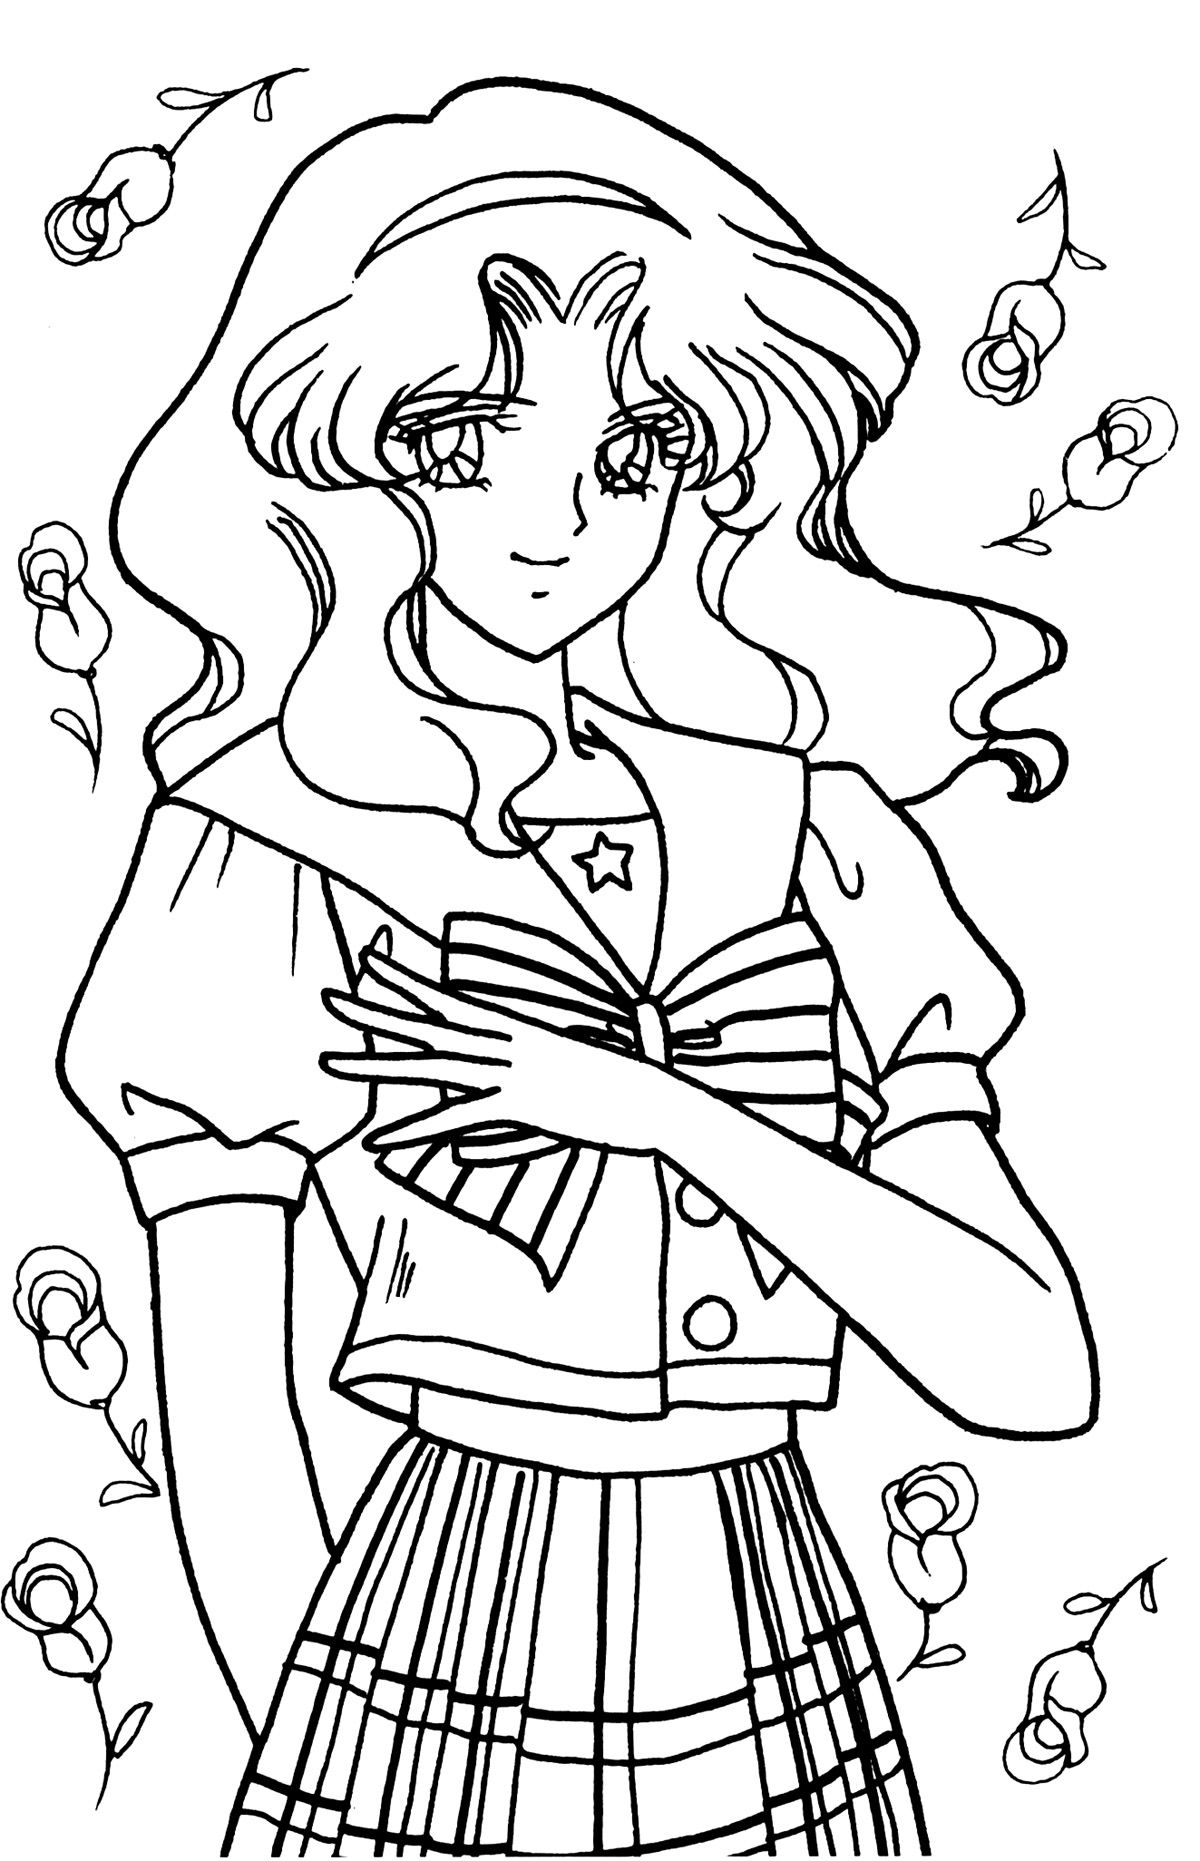 Neptune Coloring Page at GetColorings.com | Free printable colorings ...